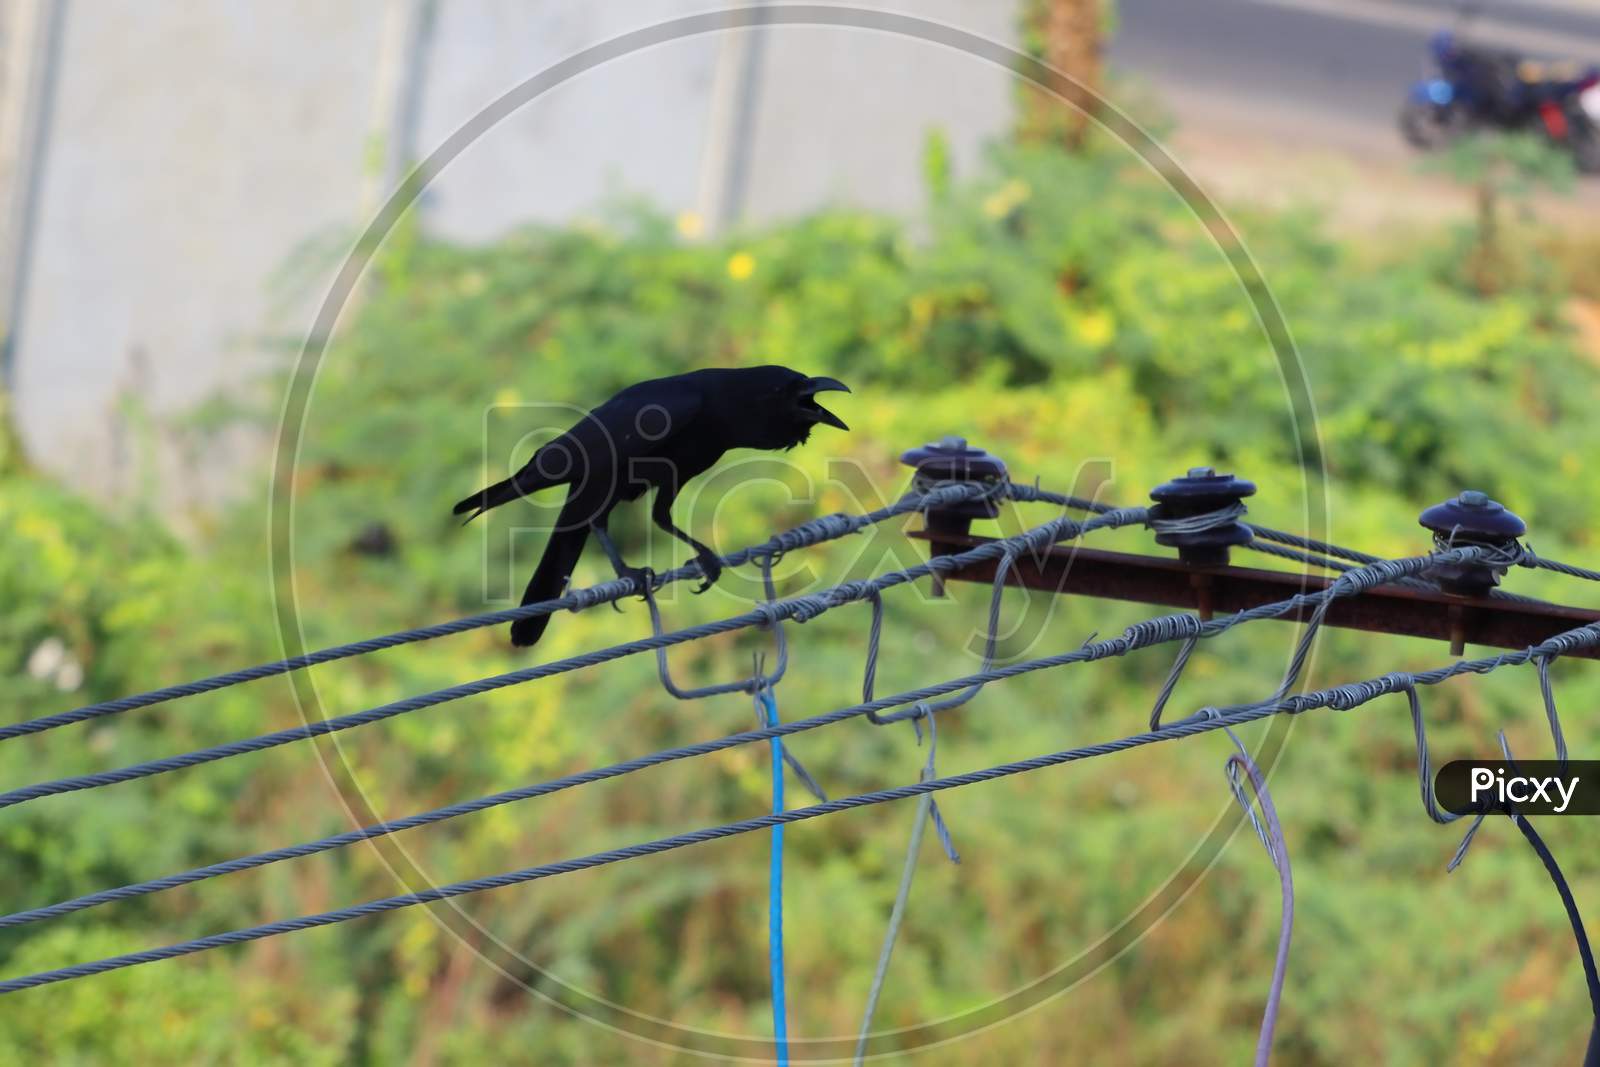 side view of carrion crow ( himalayas corvus) sitting on wire in the summer, bird background